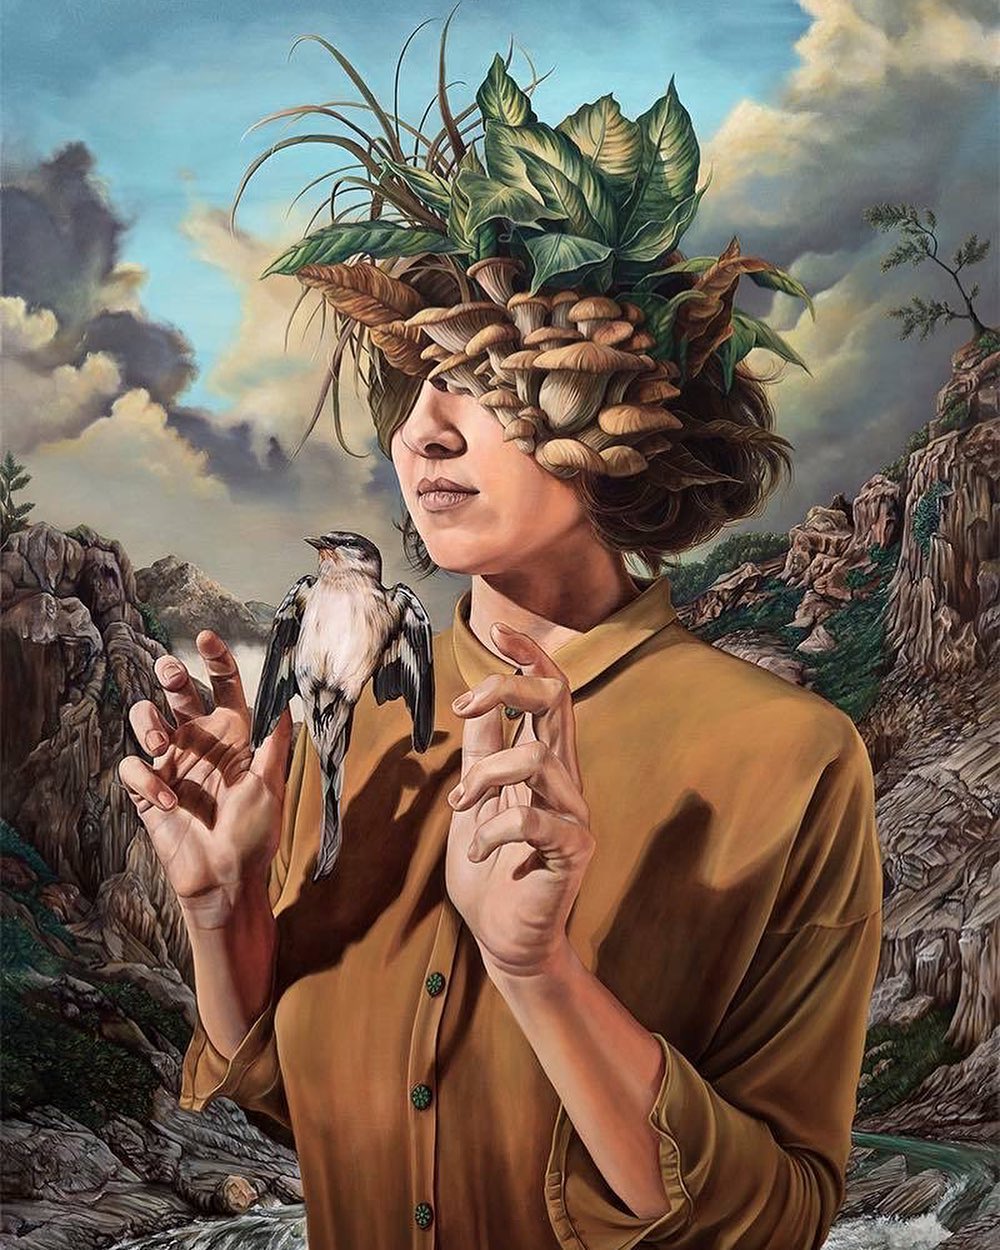 Sacred Plants Surreal Oil Paintings Of People Fused With Nature By Alejandro Pasquale 3